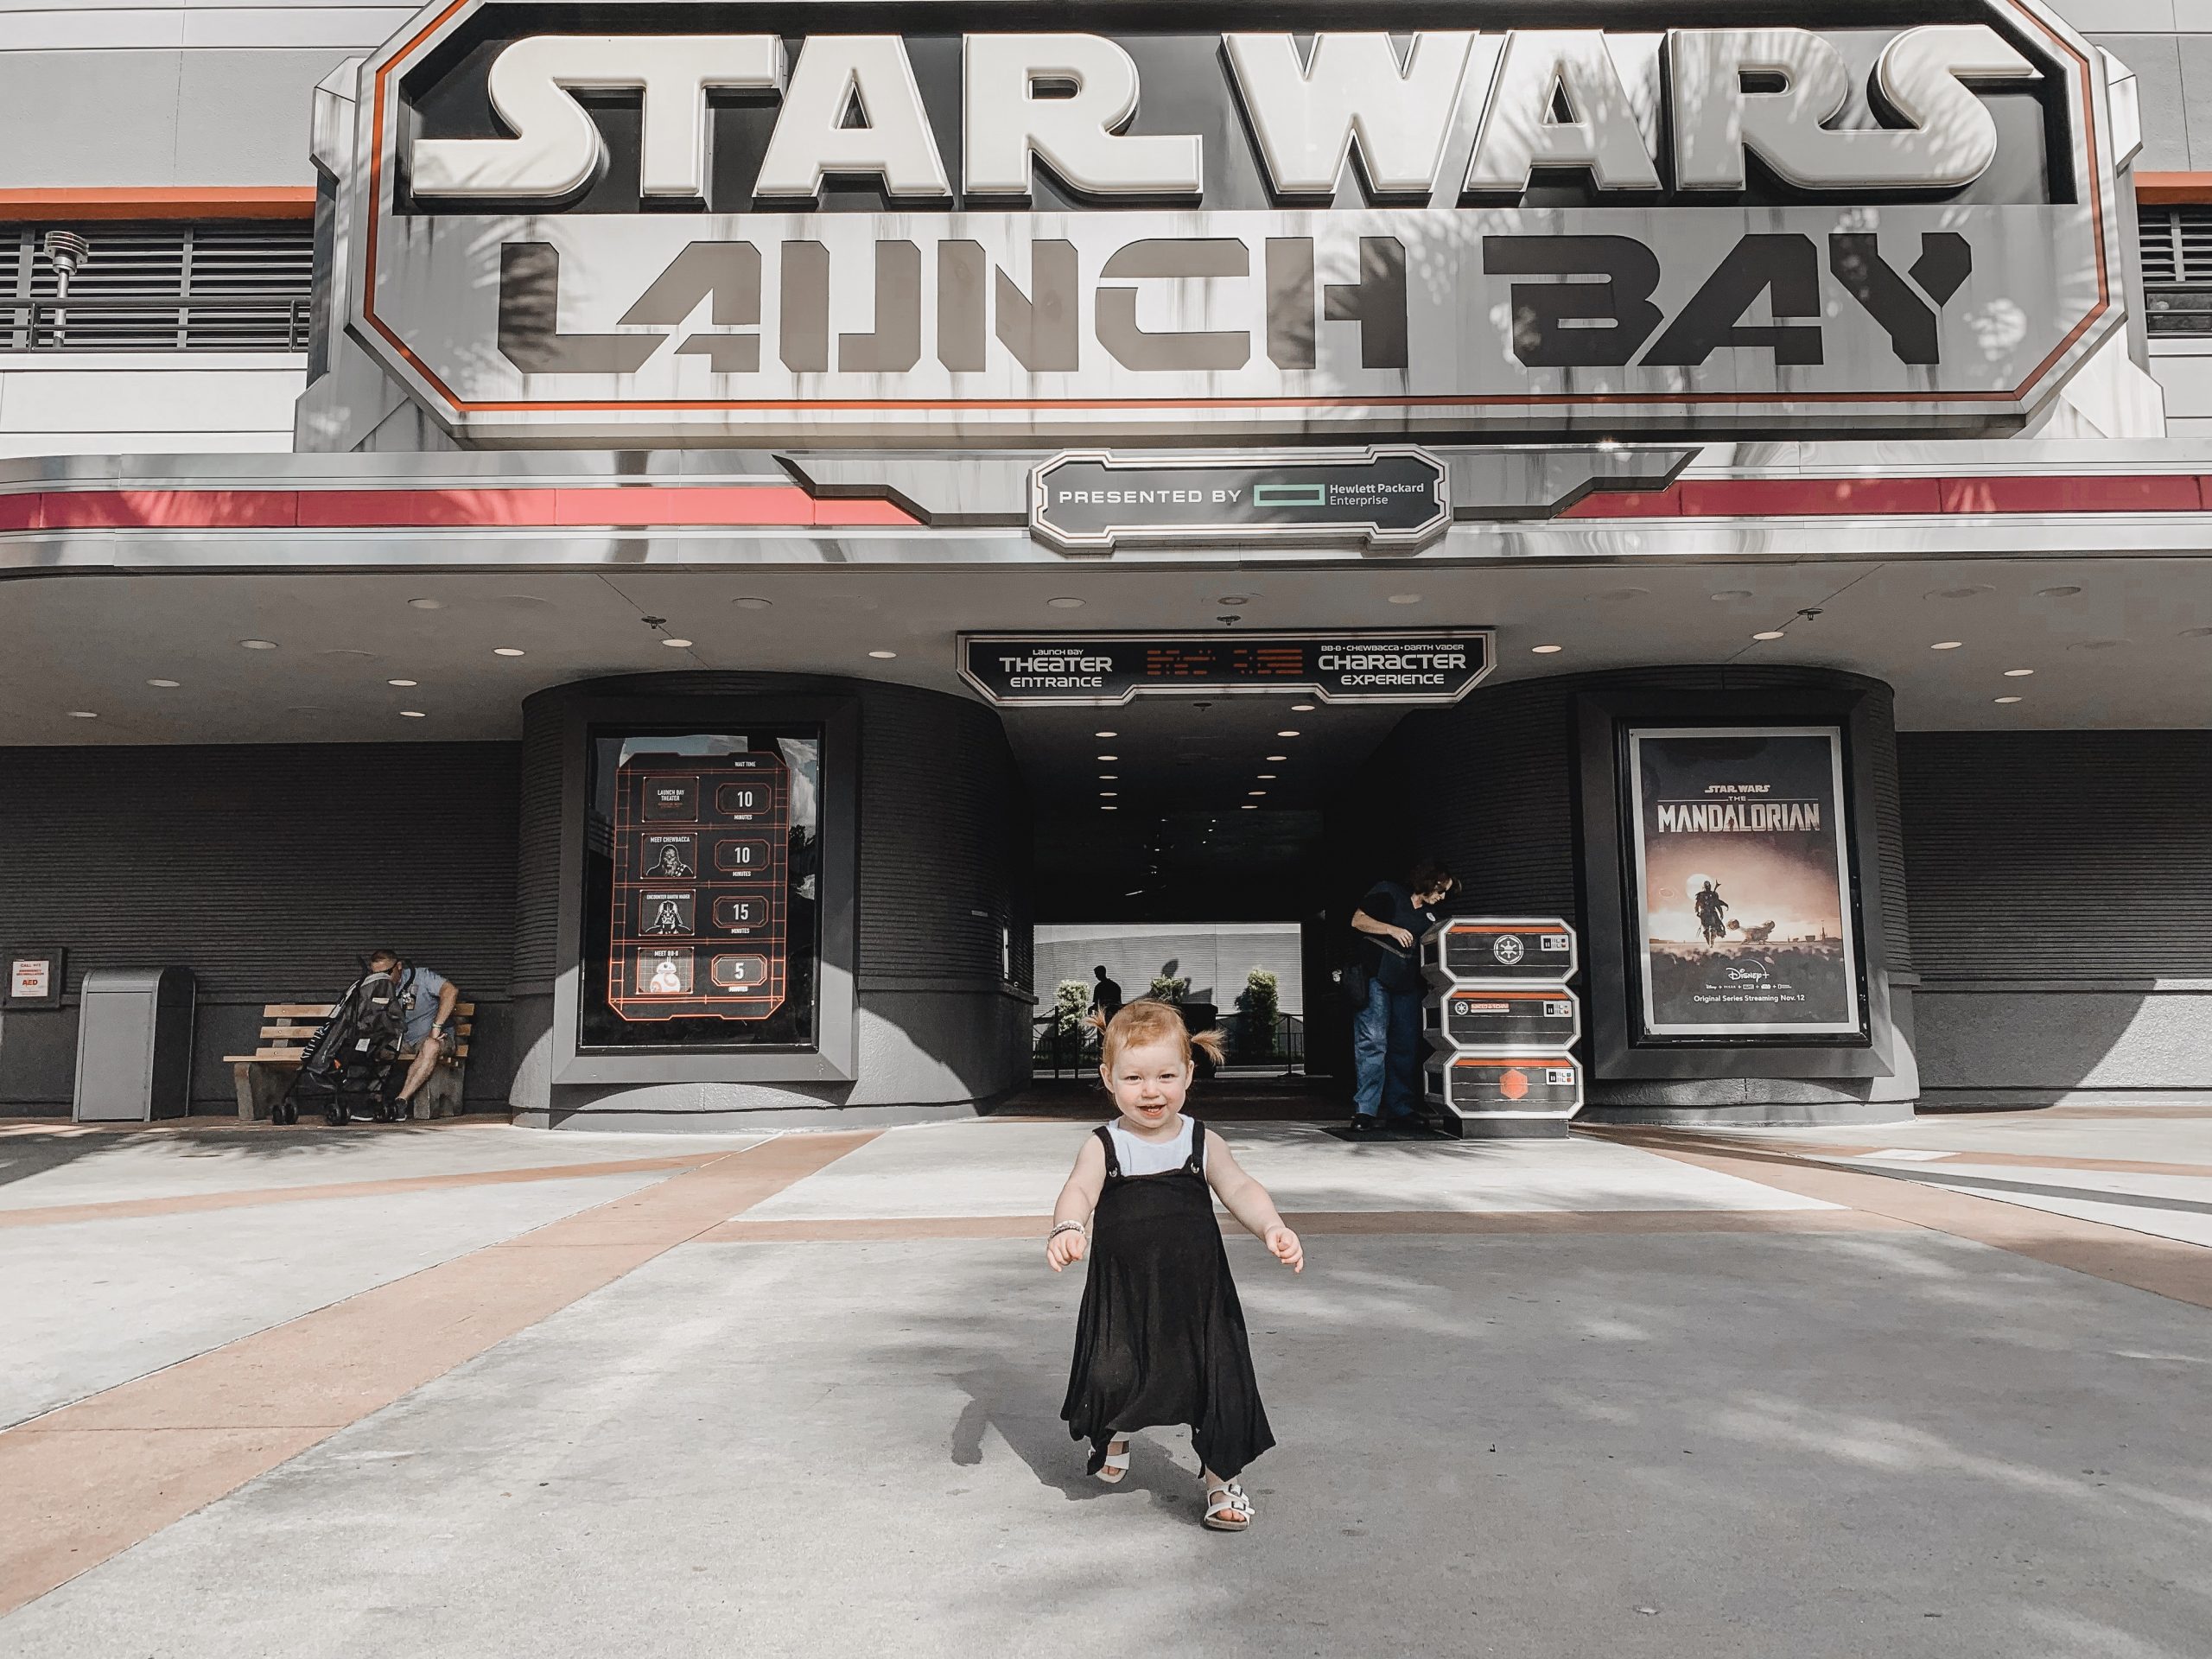 little girl in front of 'Star Wars launch bay'